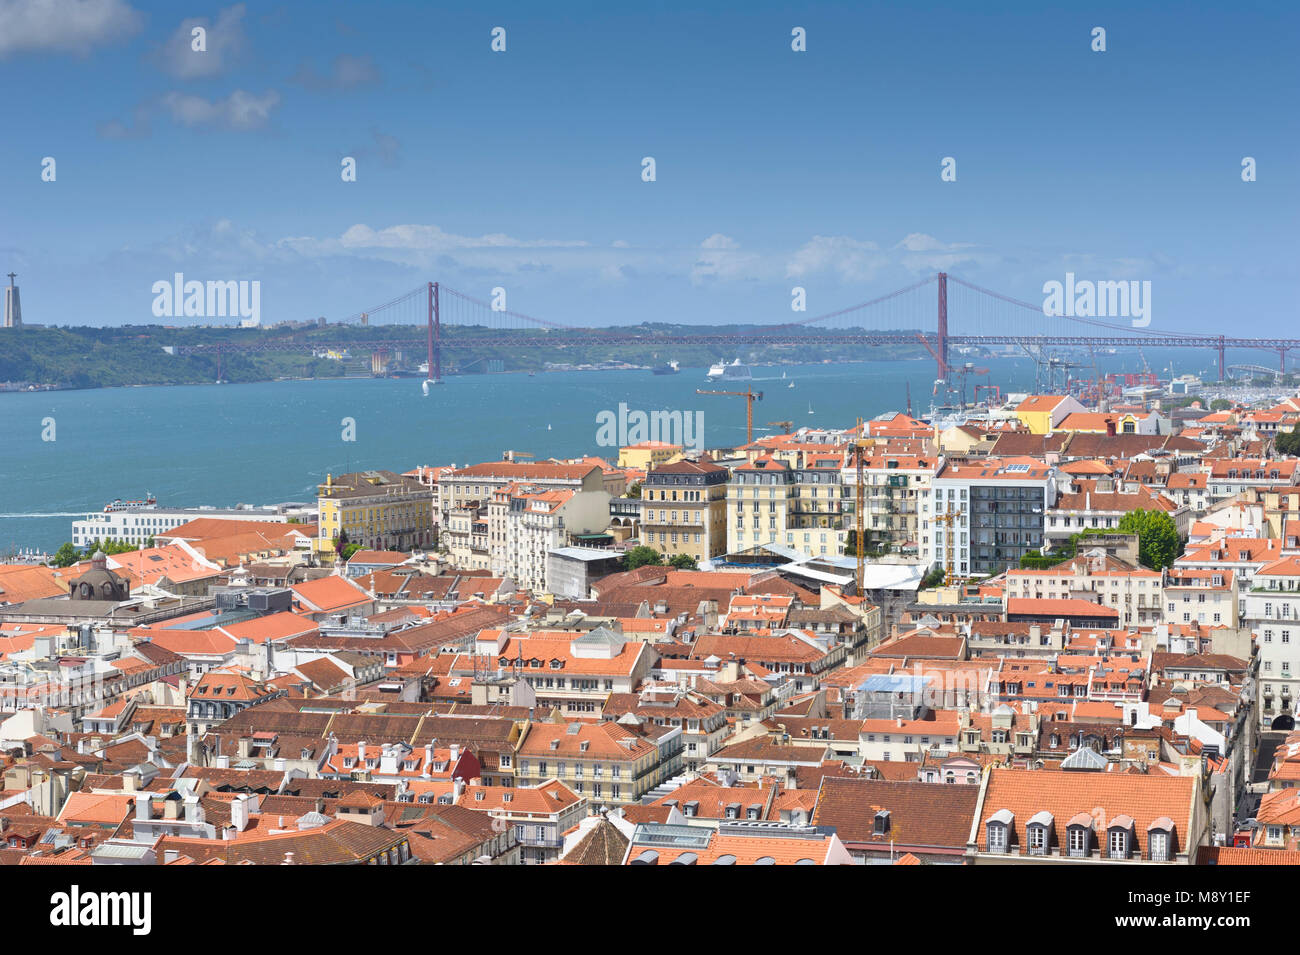 The City of Lisbon from the São Jorge Castle, Portugal Stock Photo